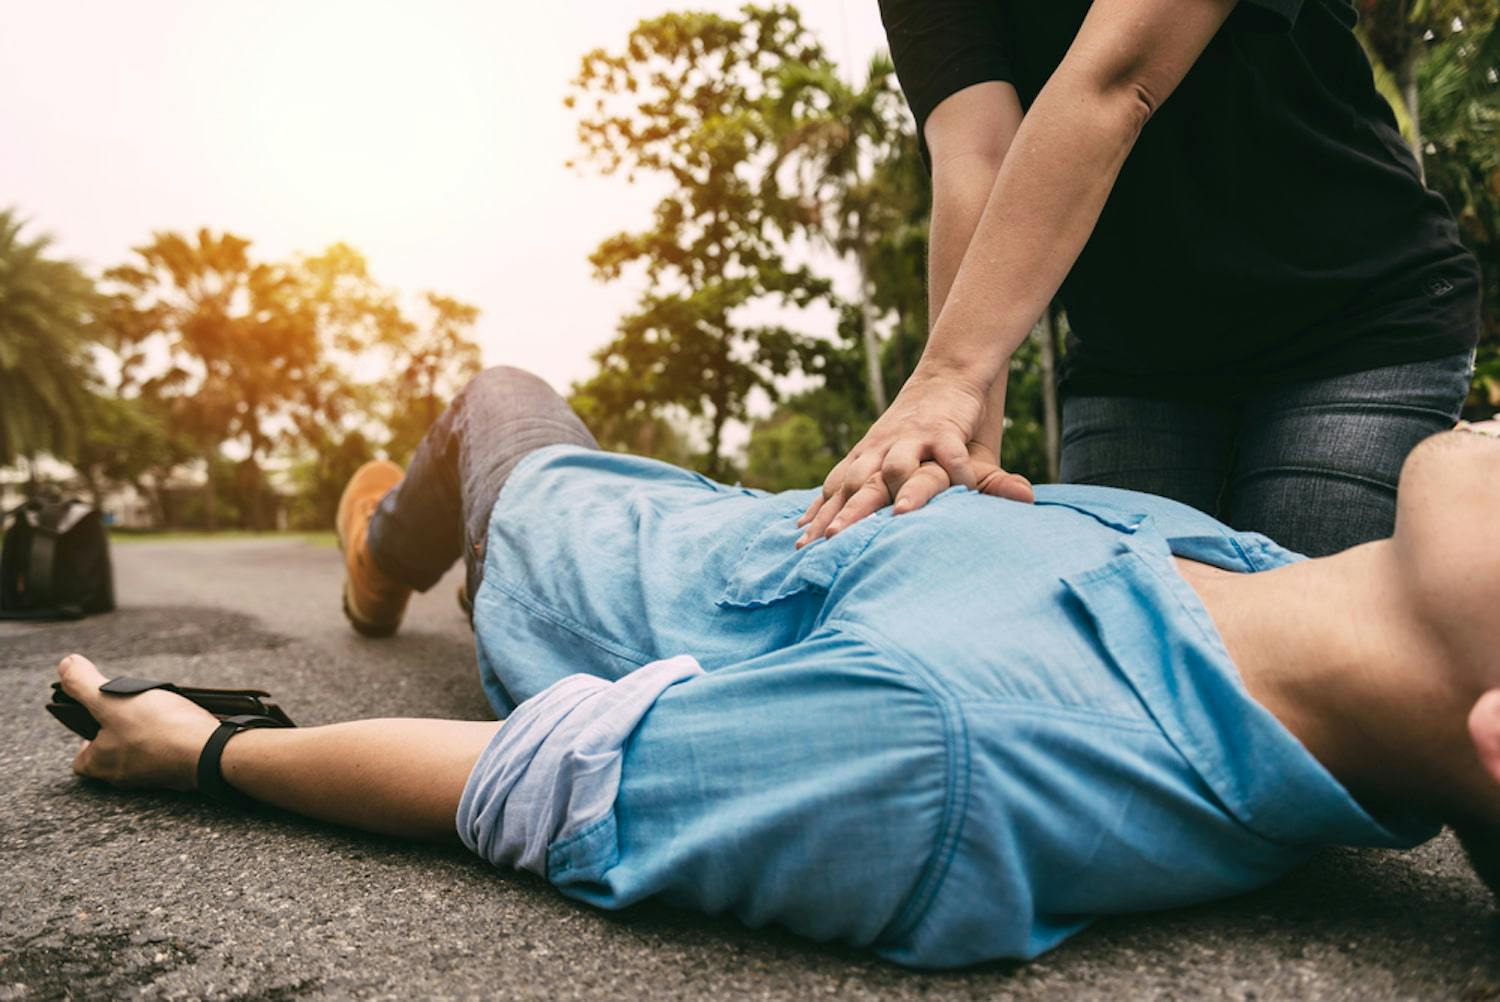 Only Half of UK Adults Confident Enough to Save a Life in a First Aid Emergency